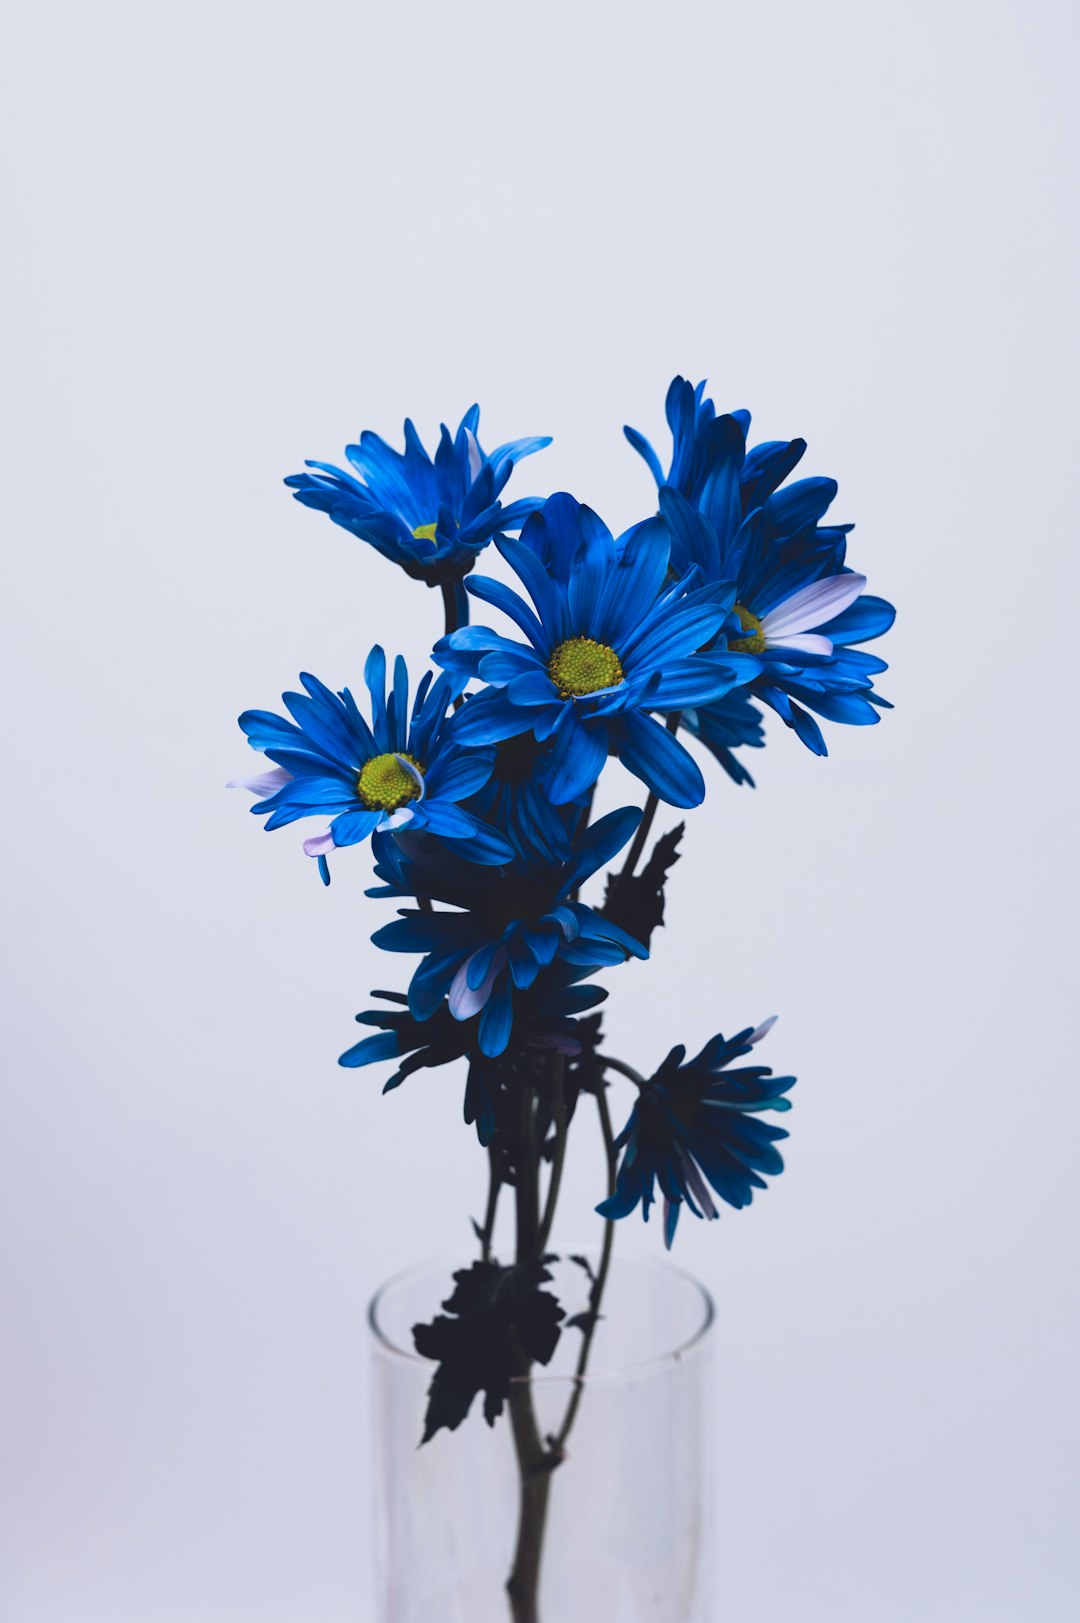 blue and white flowers on white background photo – Free Flower Image on